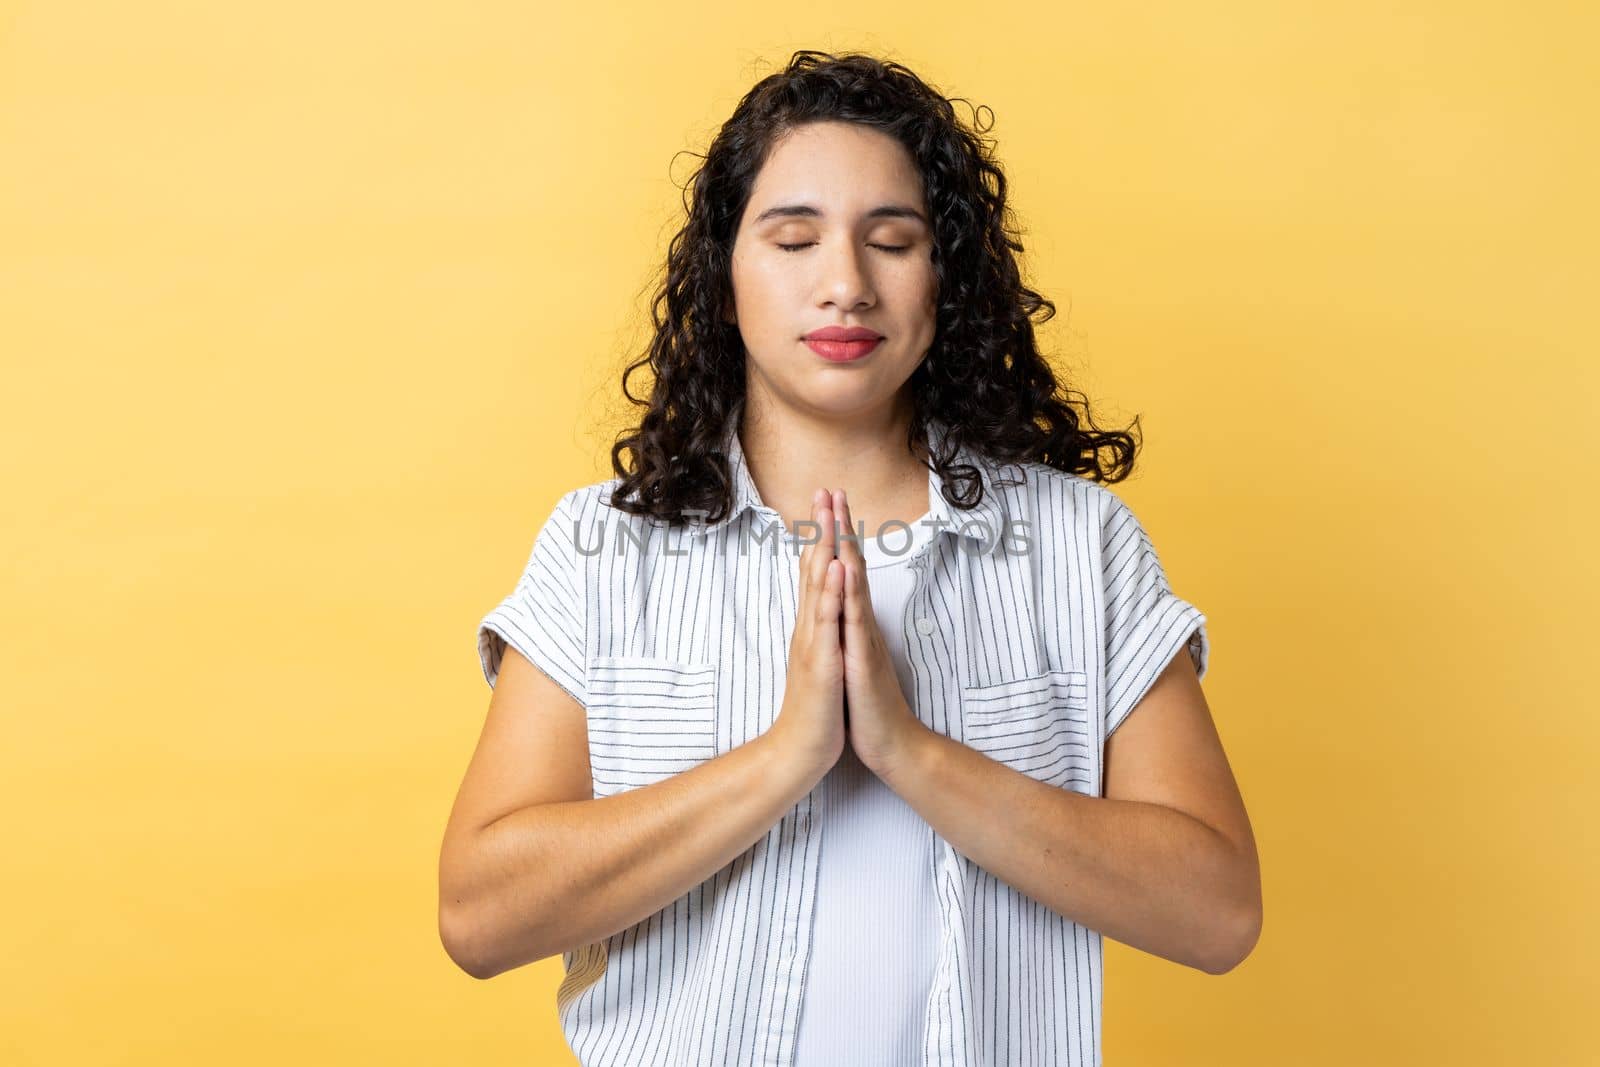 Portrait of peaceful calm relaxed woman with dark wavy hair standing with prayer gesture, keeping eyes closed, meditating sitting in yoga position. Indoor studio shot isolated on yellow background.